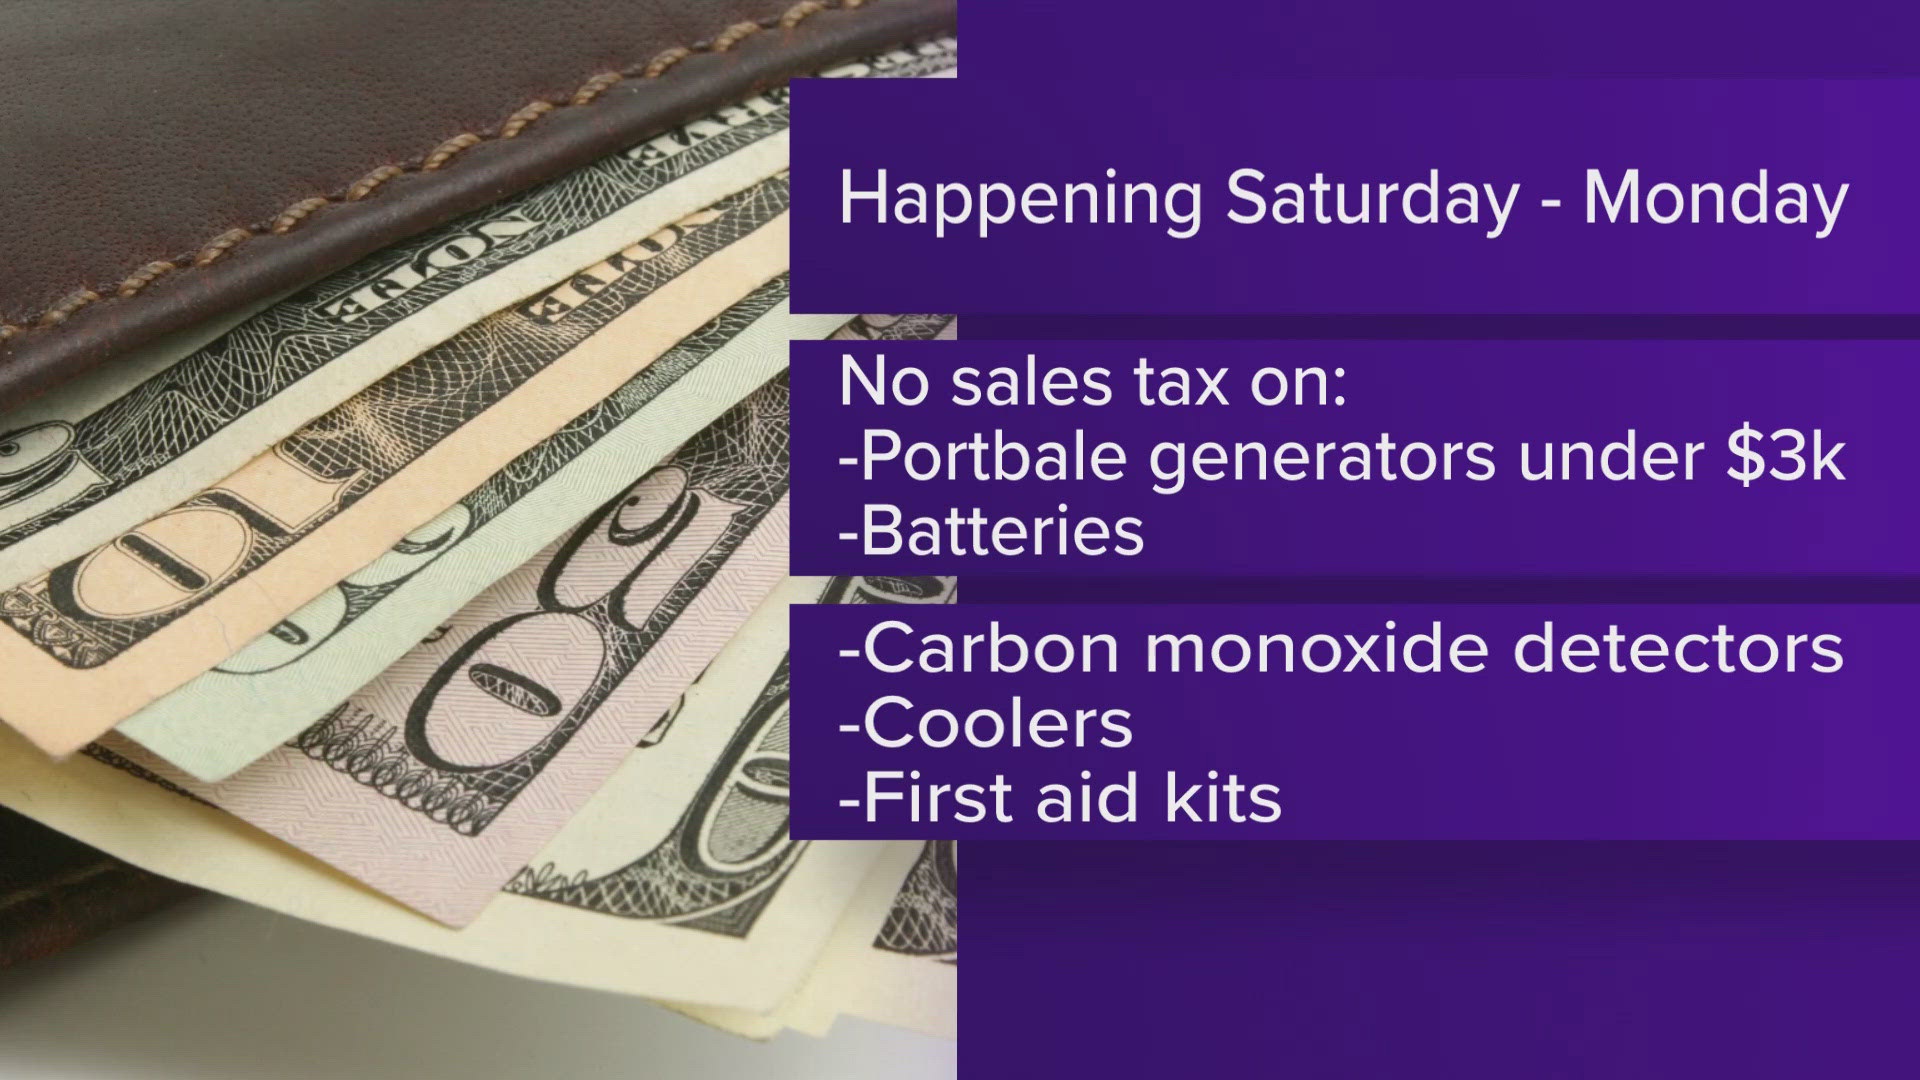 Some of the items that can be purchased sales tax-free include some portable generators, batteries, coolers and more.